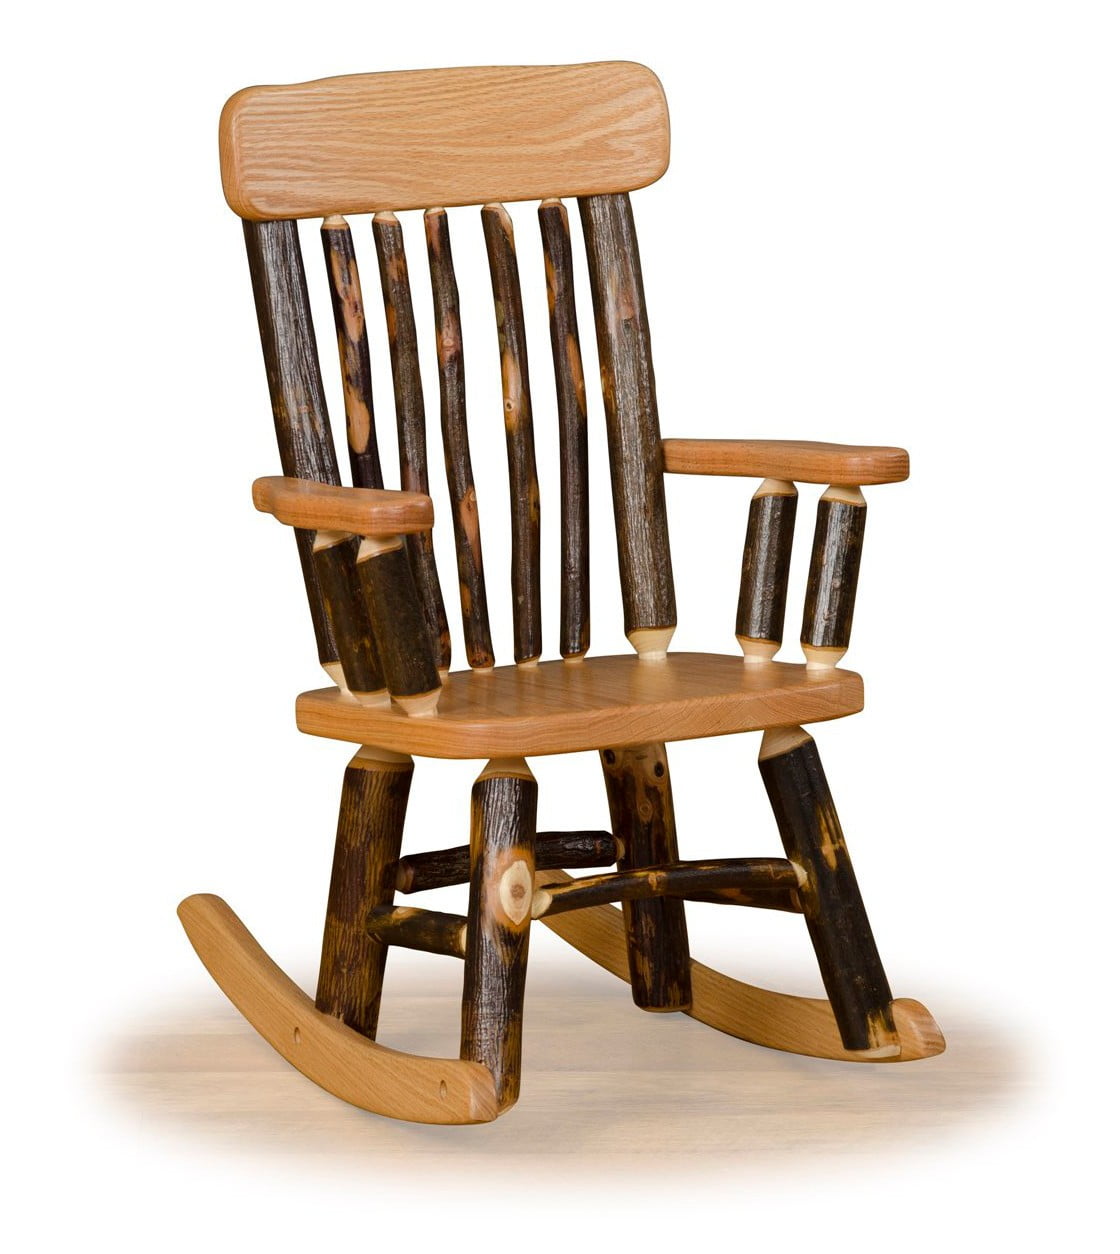 Rustic Hickory Spindle Back Childrens’ Rocking Chair